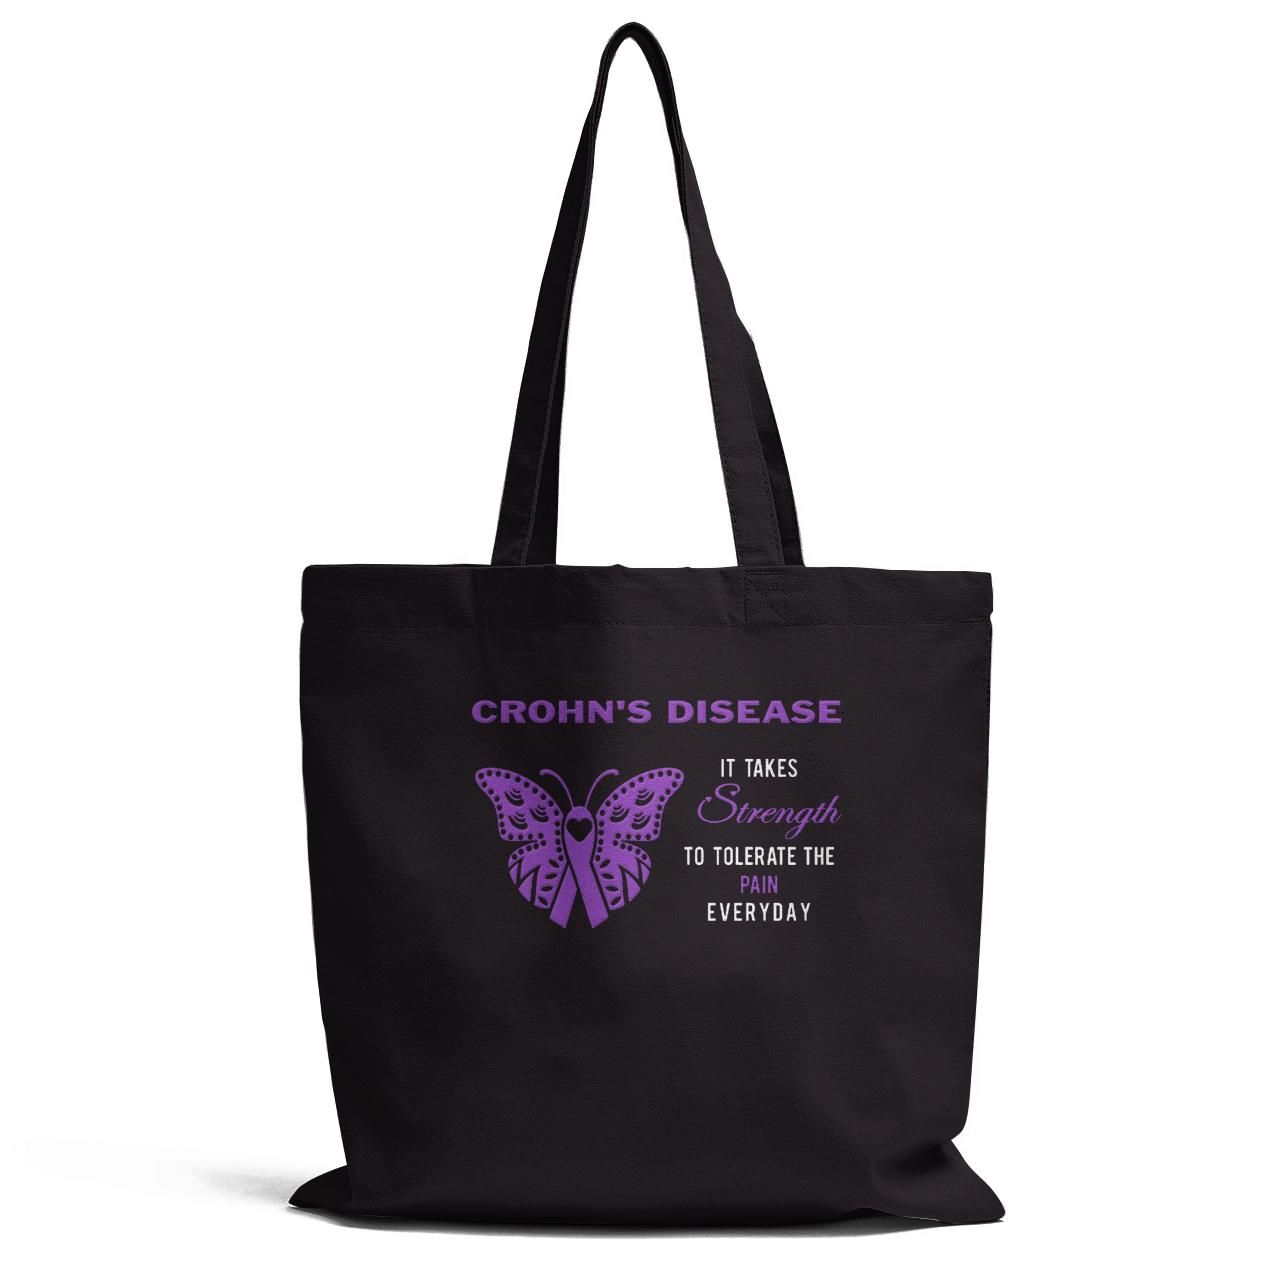 It Take Strengthe To Tolerate The Pain Everyday Tote Bag